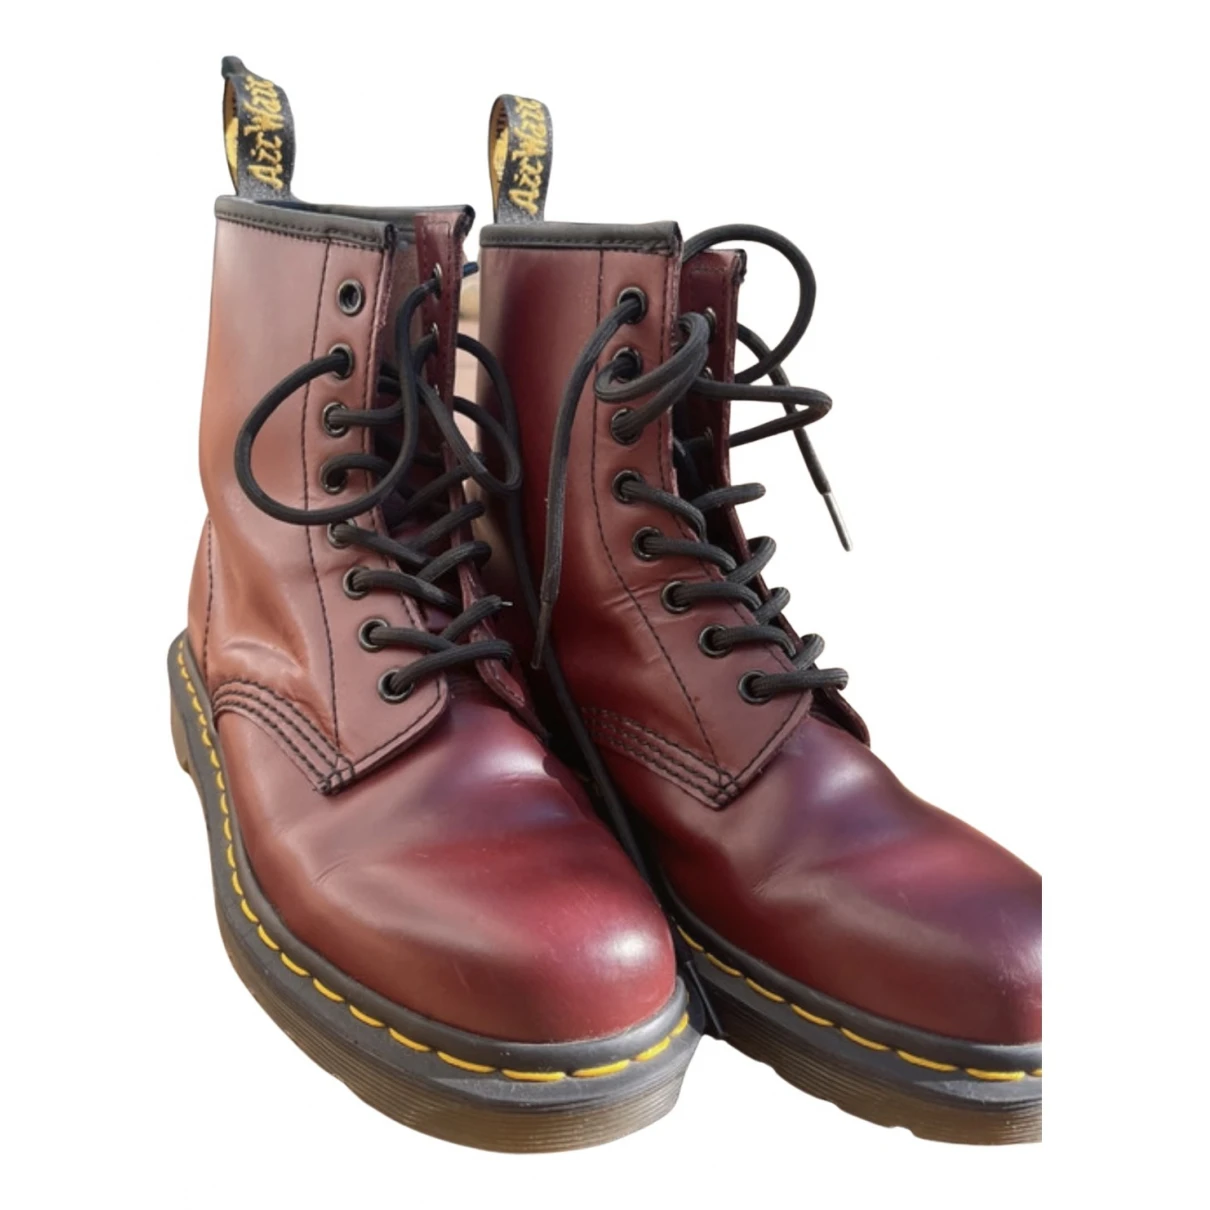 shoes Dr. Martens boots for Female Leather 38 EU. Used condition